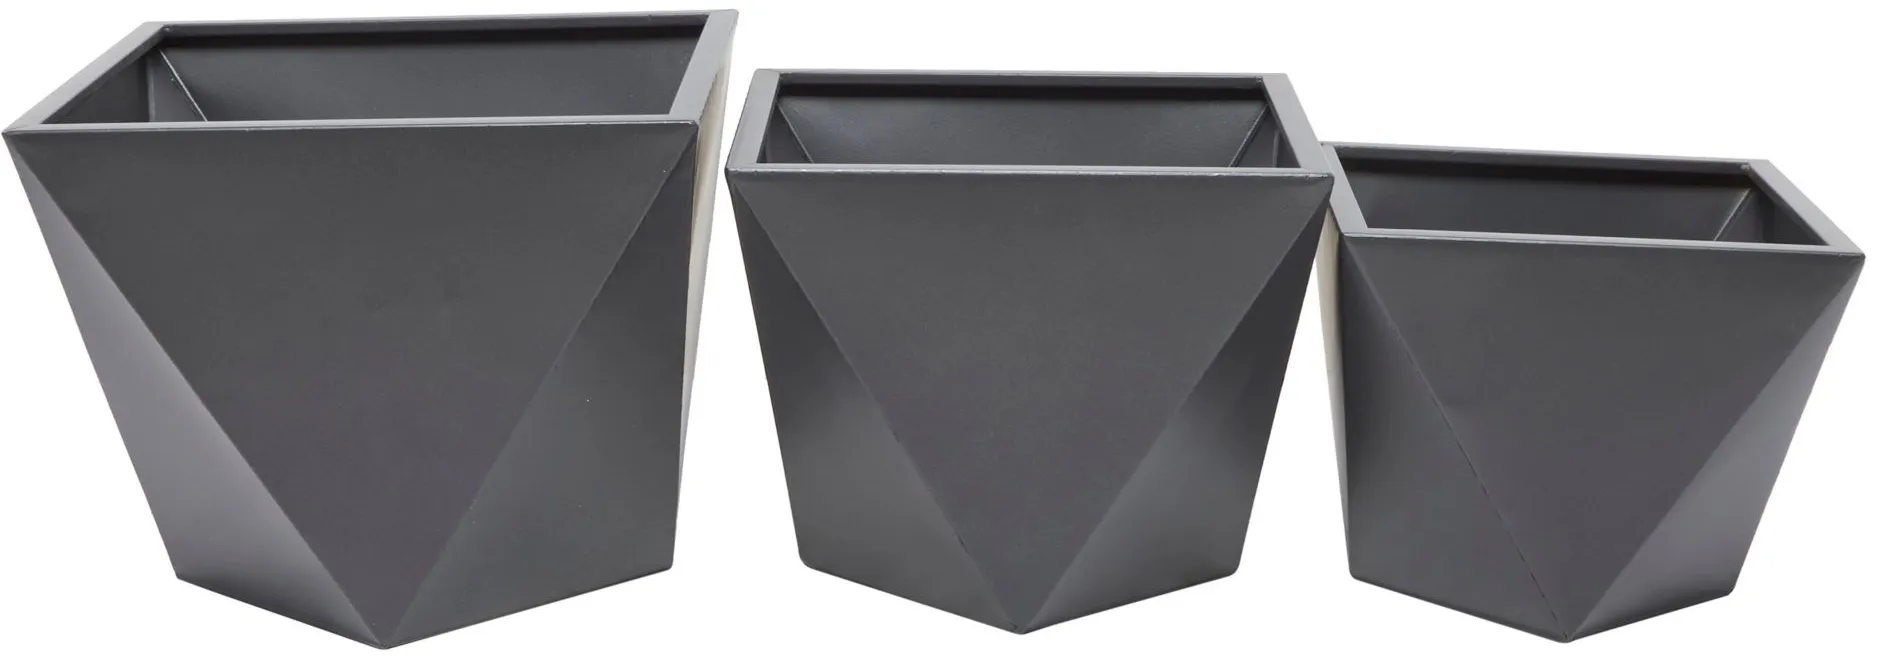 Ivy Collection Jemstar Planter Set of 3 in Gray by UMA Enterprises